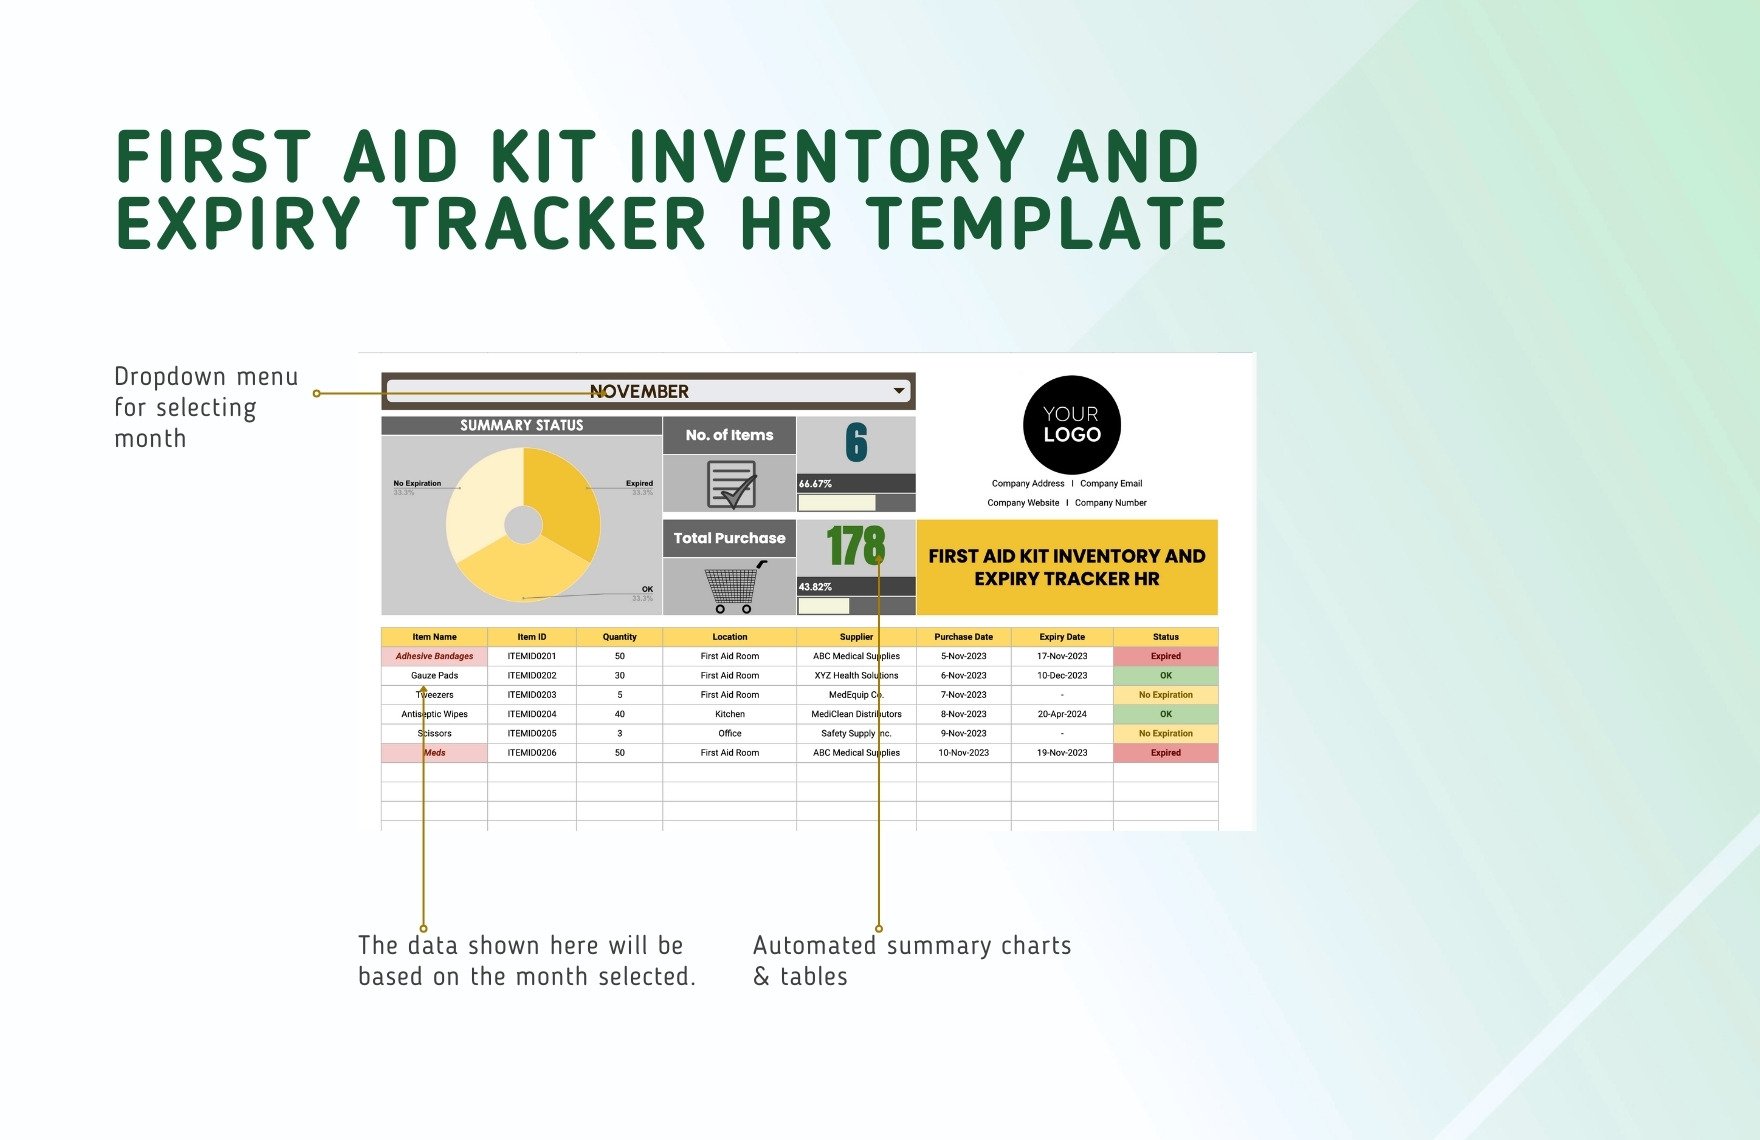 First Aid Kit Inventory and Expiry Tracker HR Template